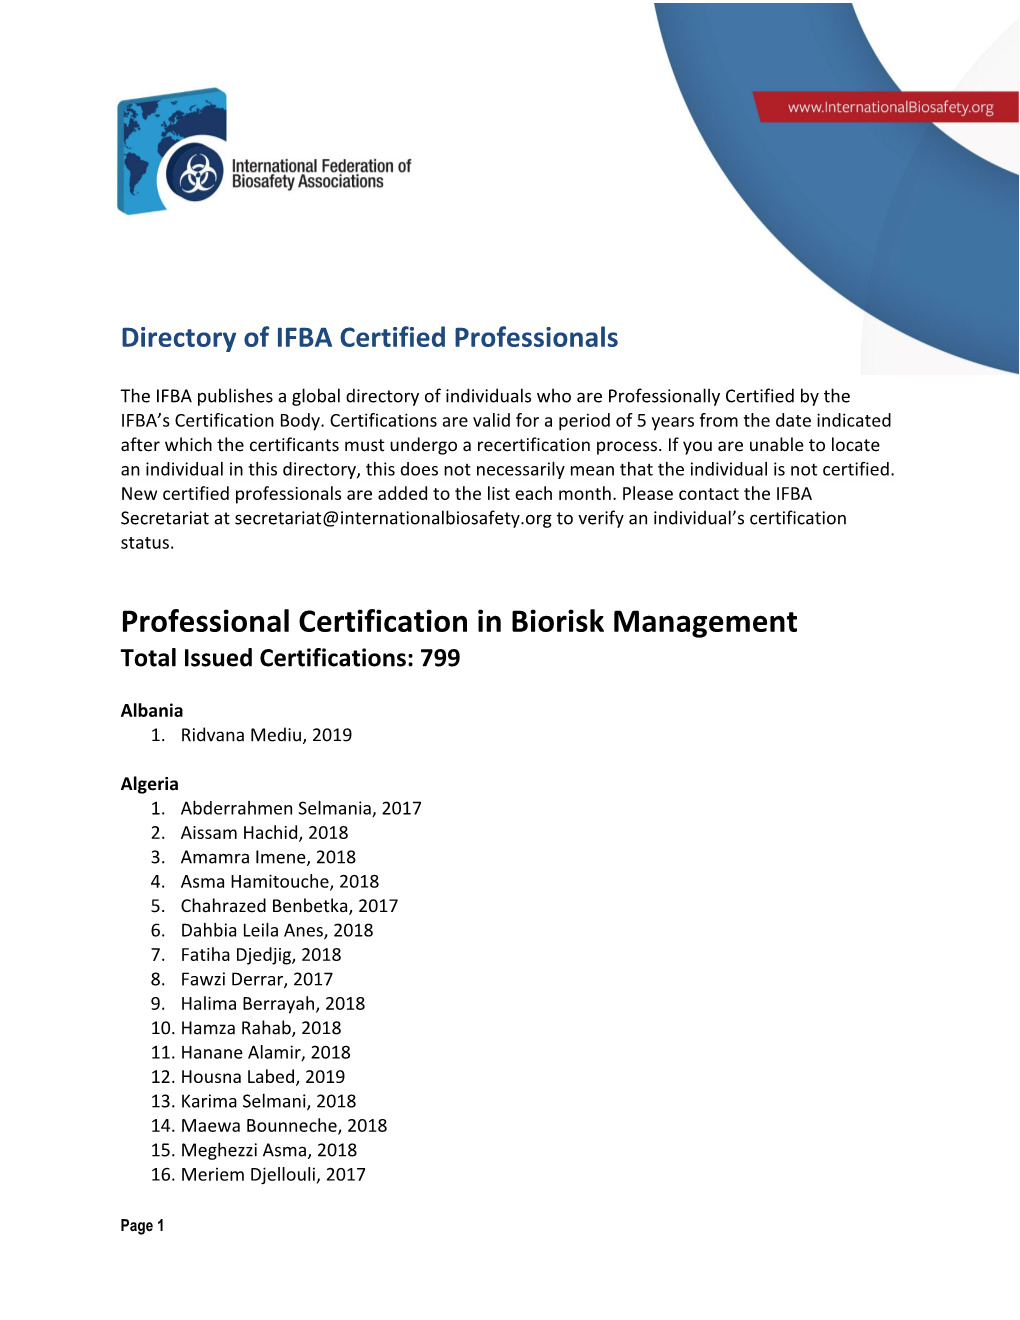 Professional Certification in Biorisk Management Total Issued Certifications: 799